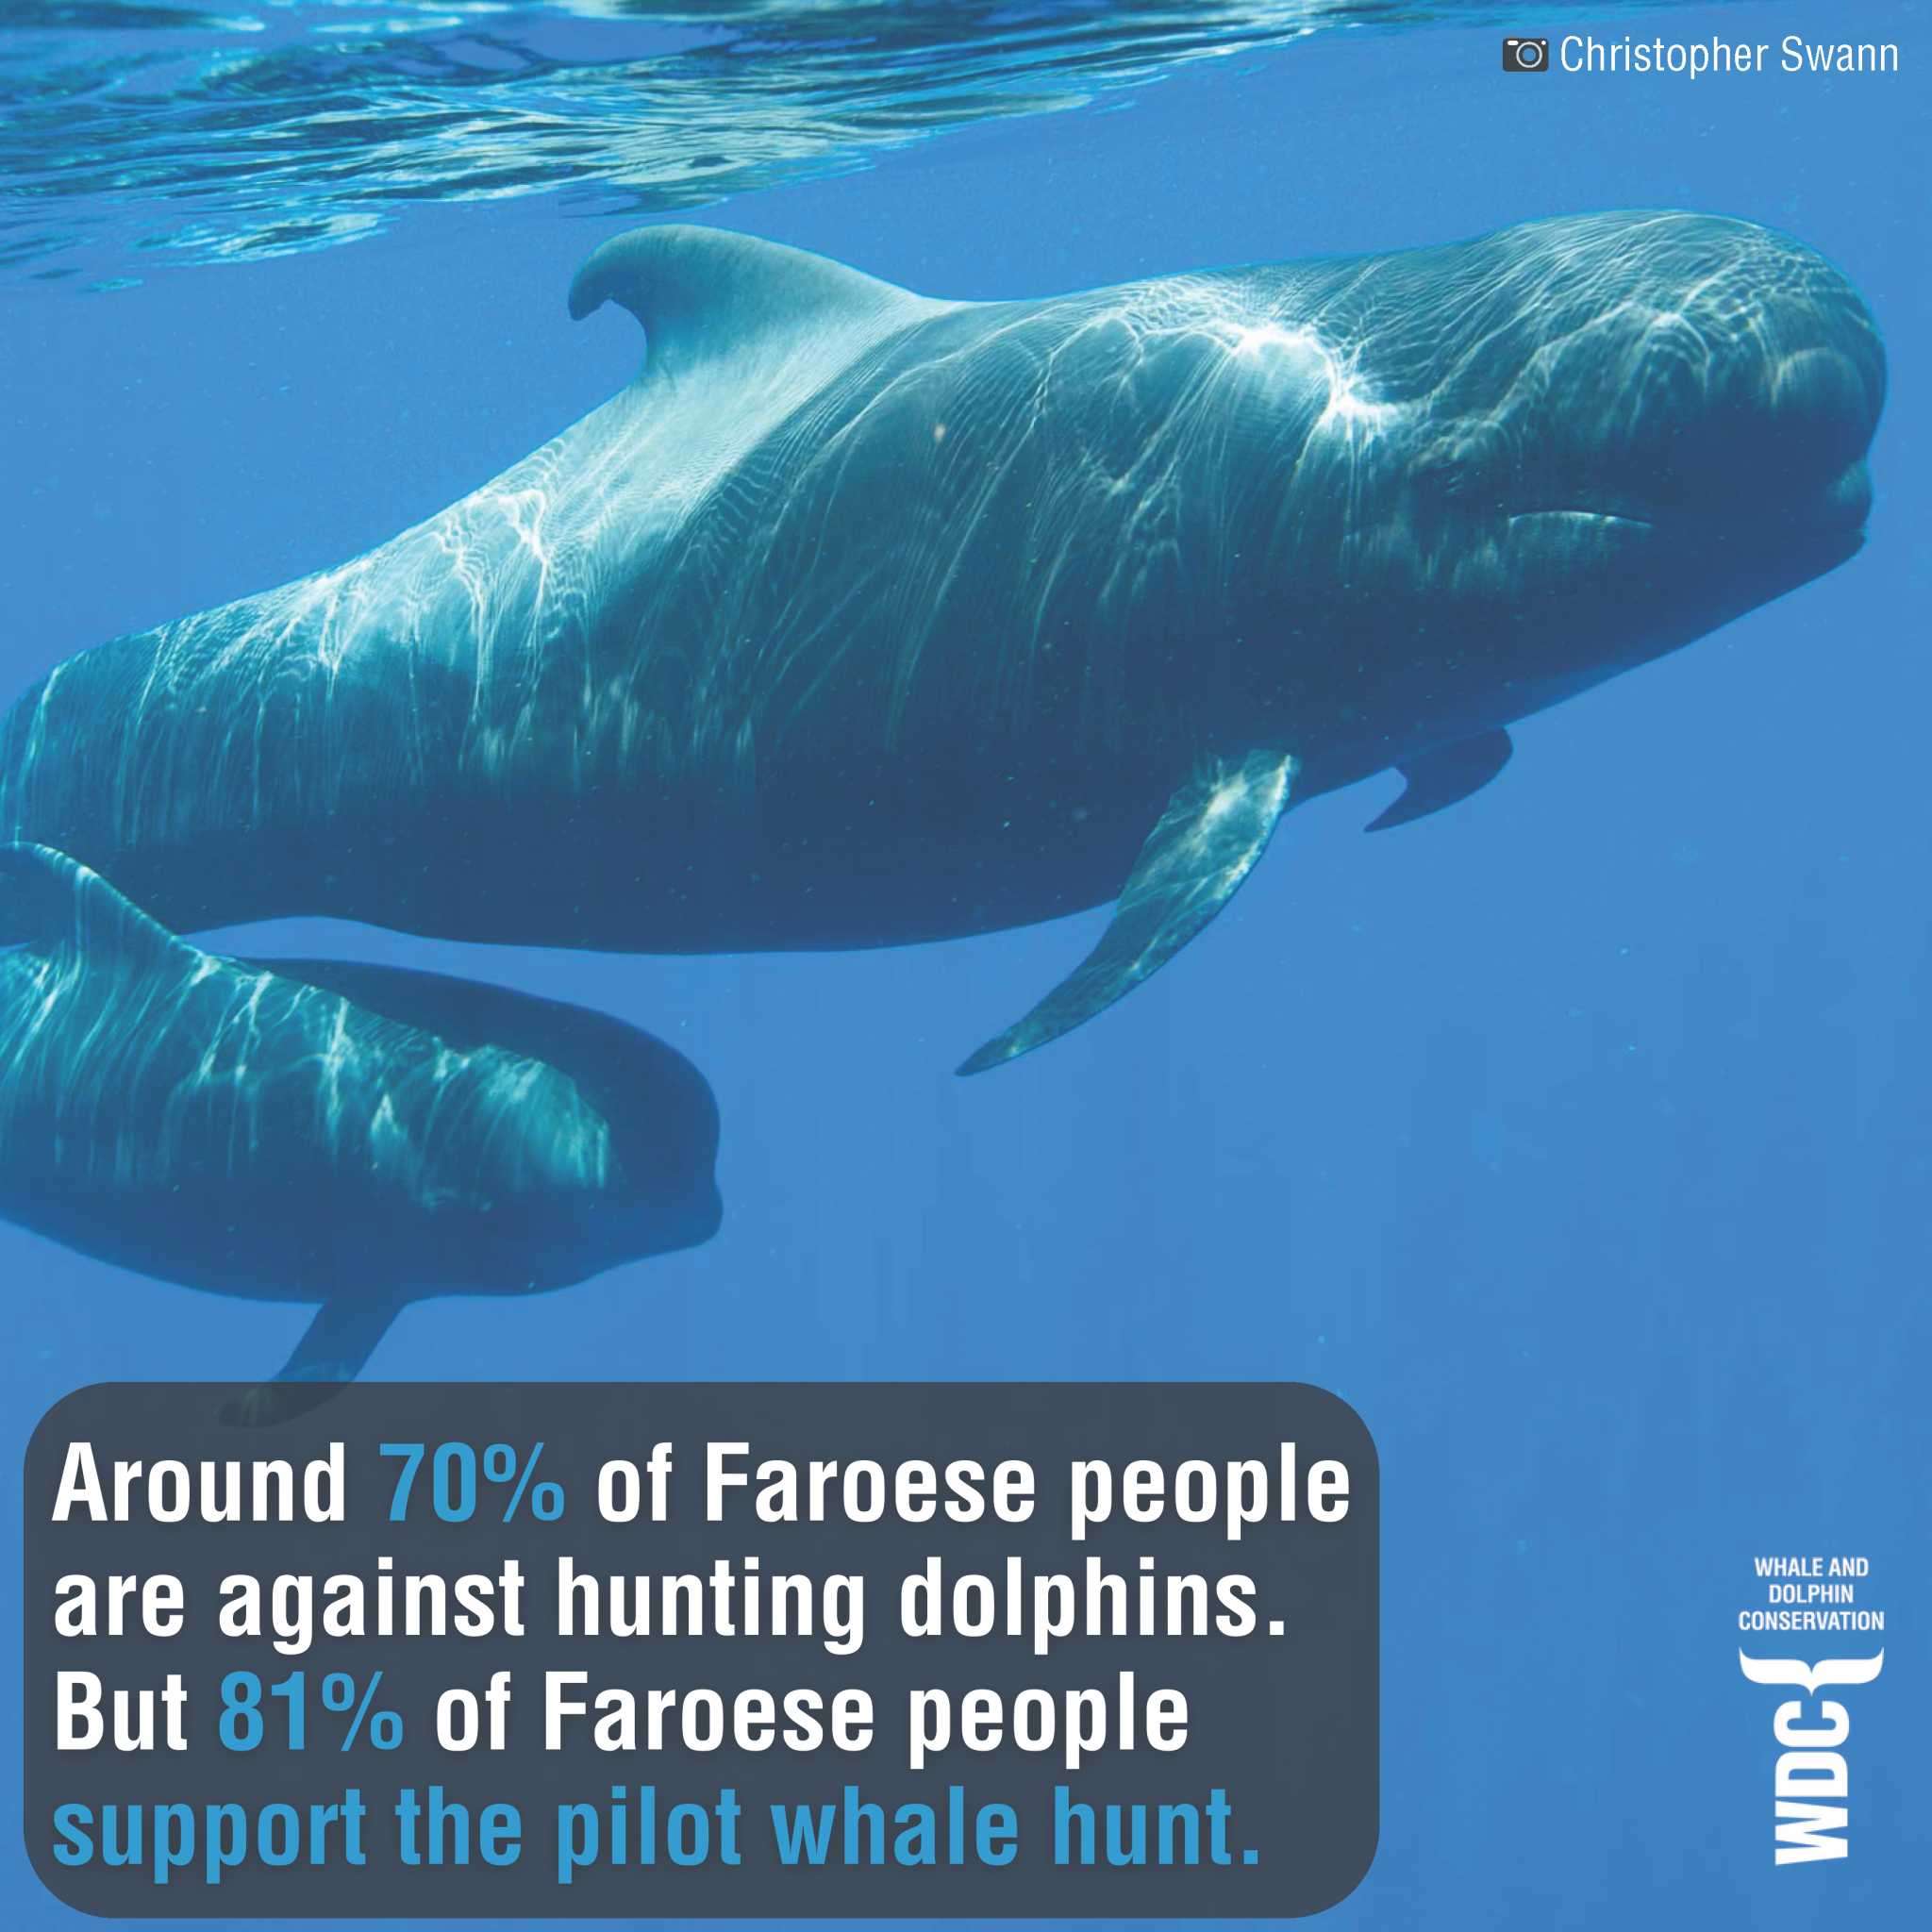 Around 70% of Faroese people are against hunting dolphins. But 81% of Faroese people support the pilot whale hunt.